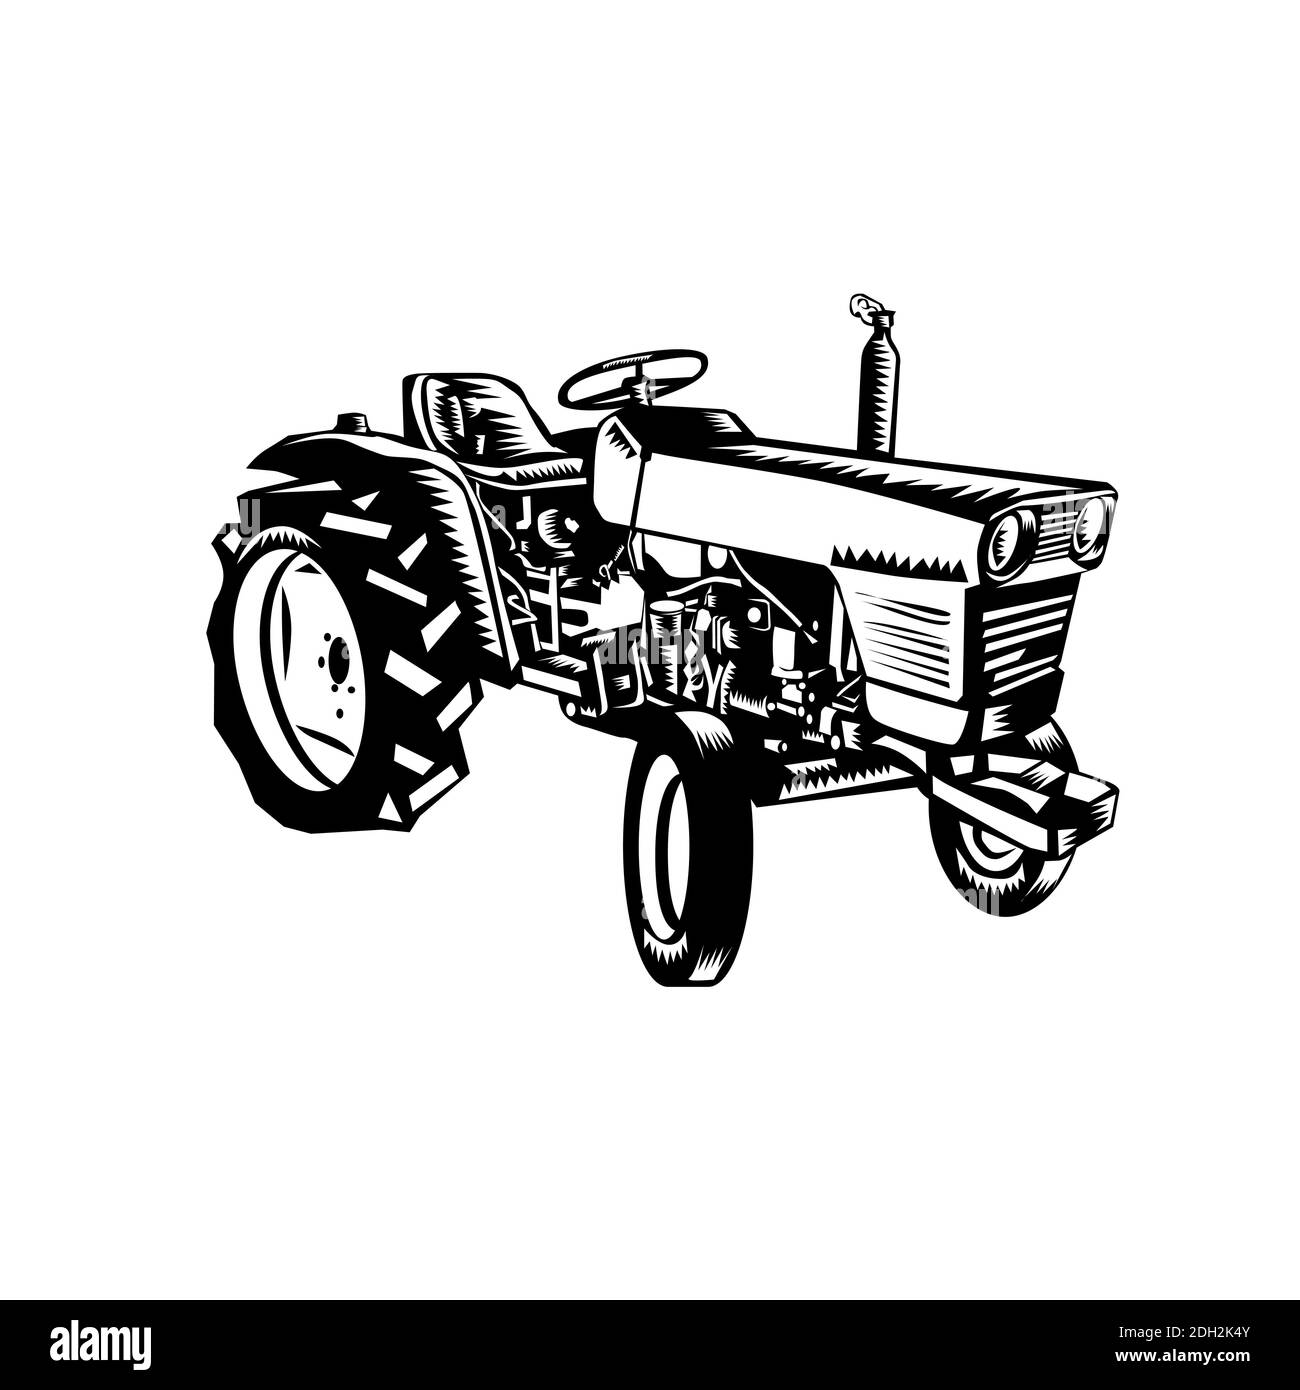 Vintage Farm Tractor Side View Woodcut Black and White Stock Photo